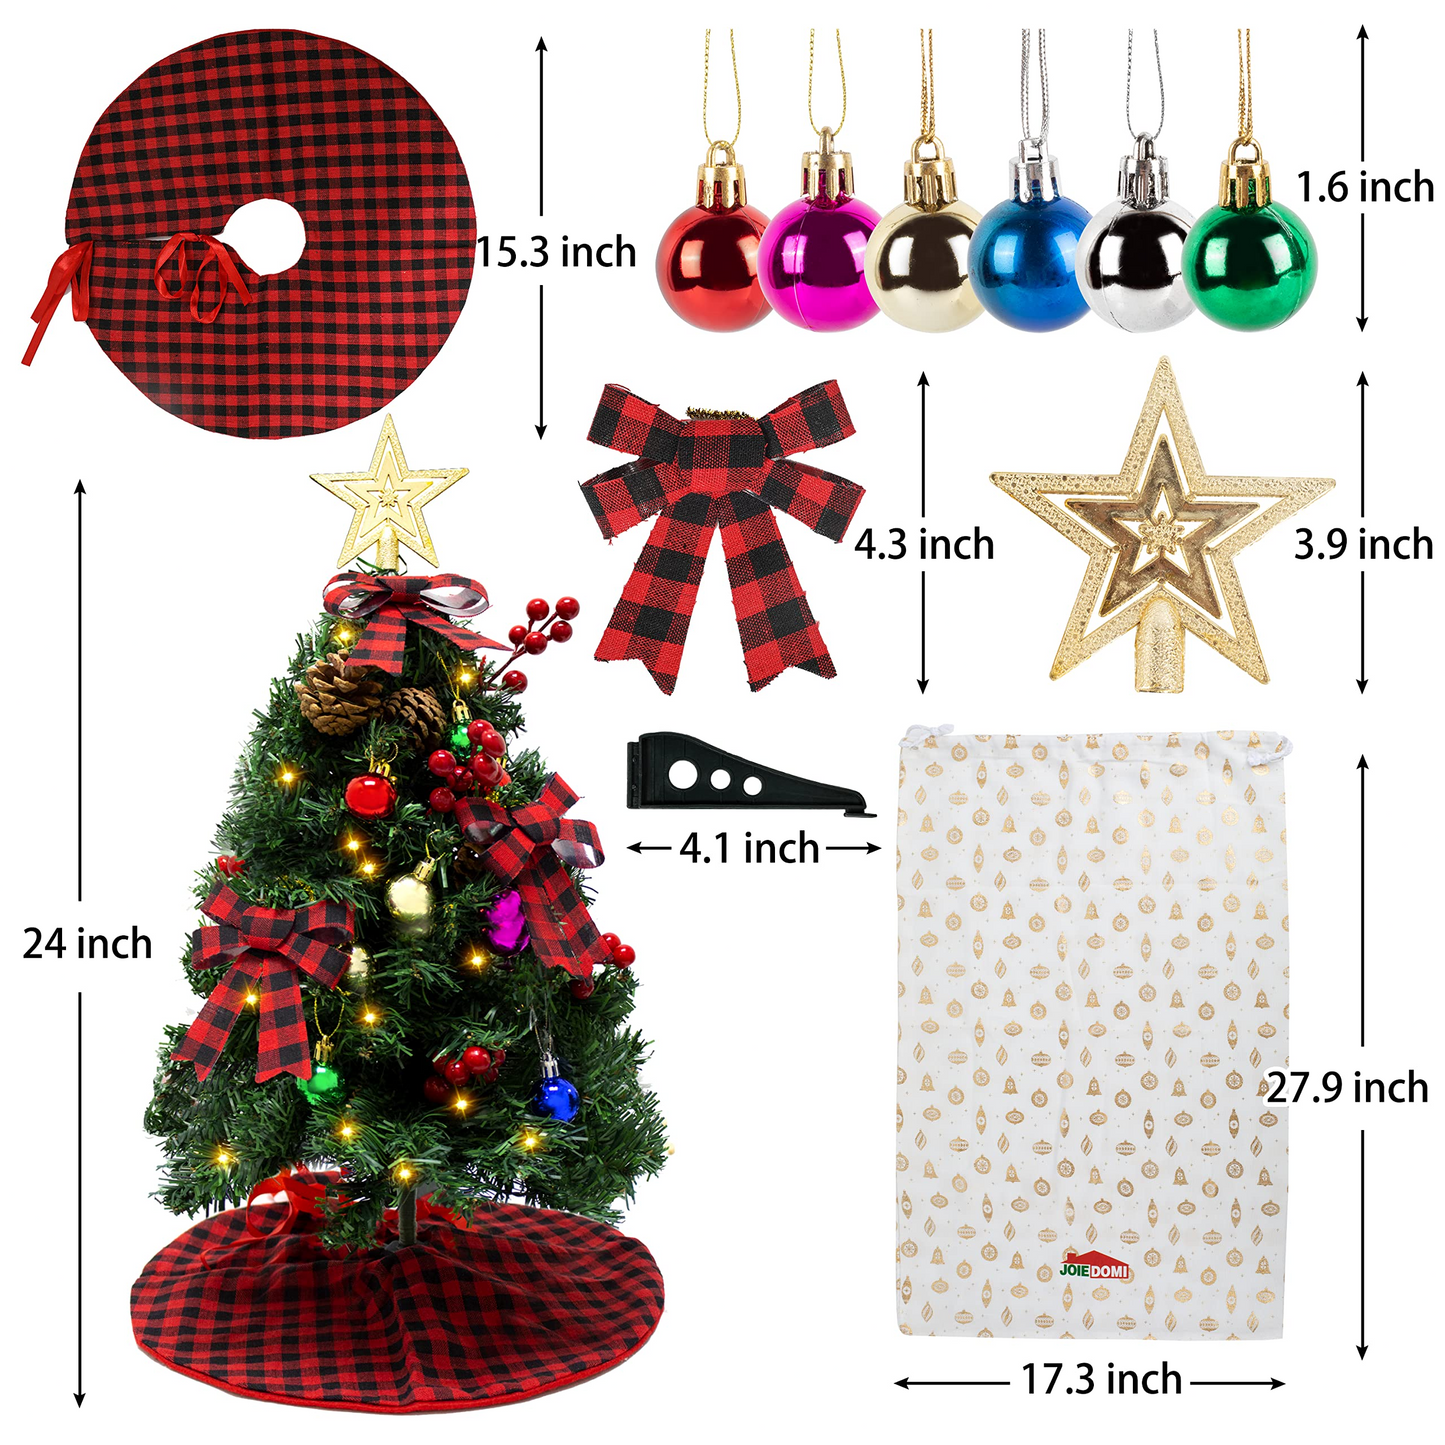 24in Prelit Tabletop Christmas Tree with Tree Skirt and Decoration Kits